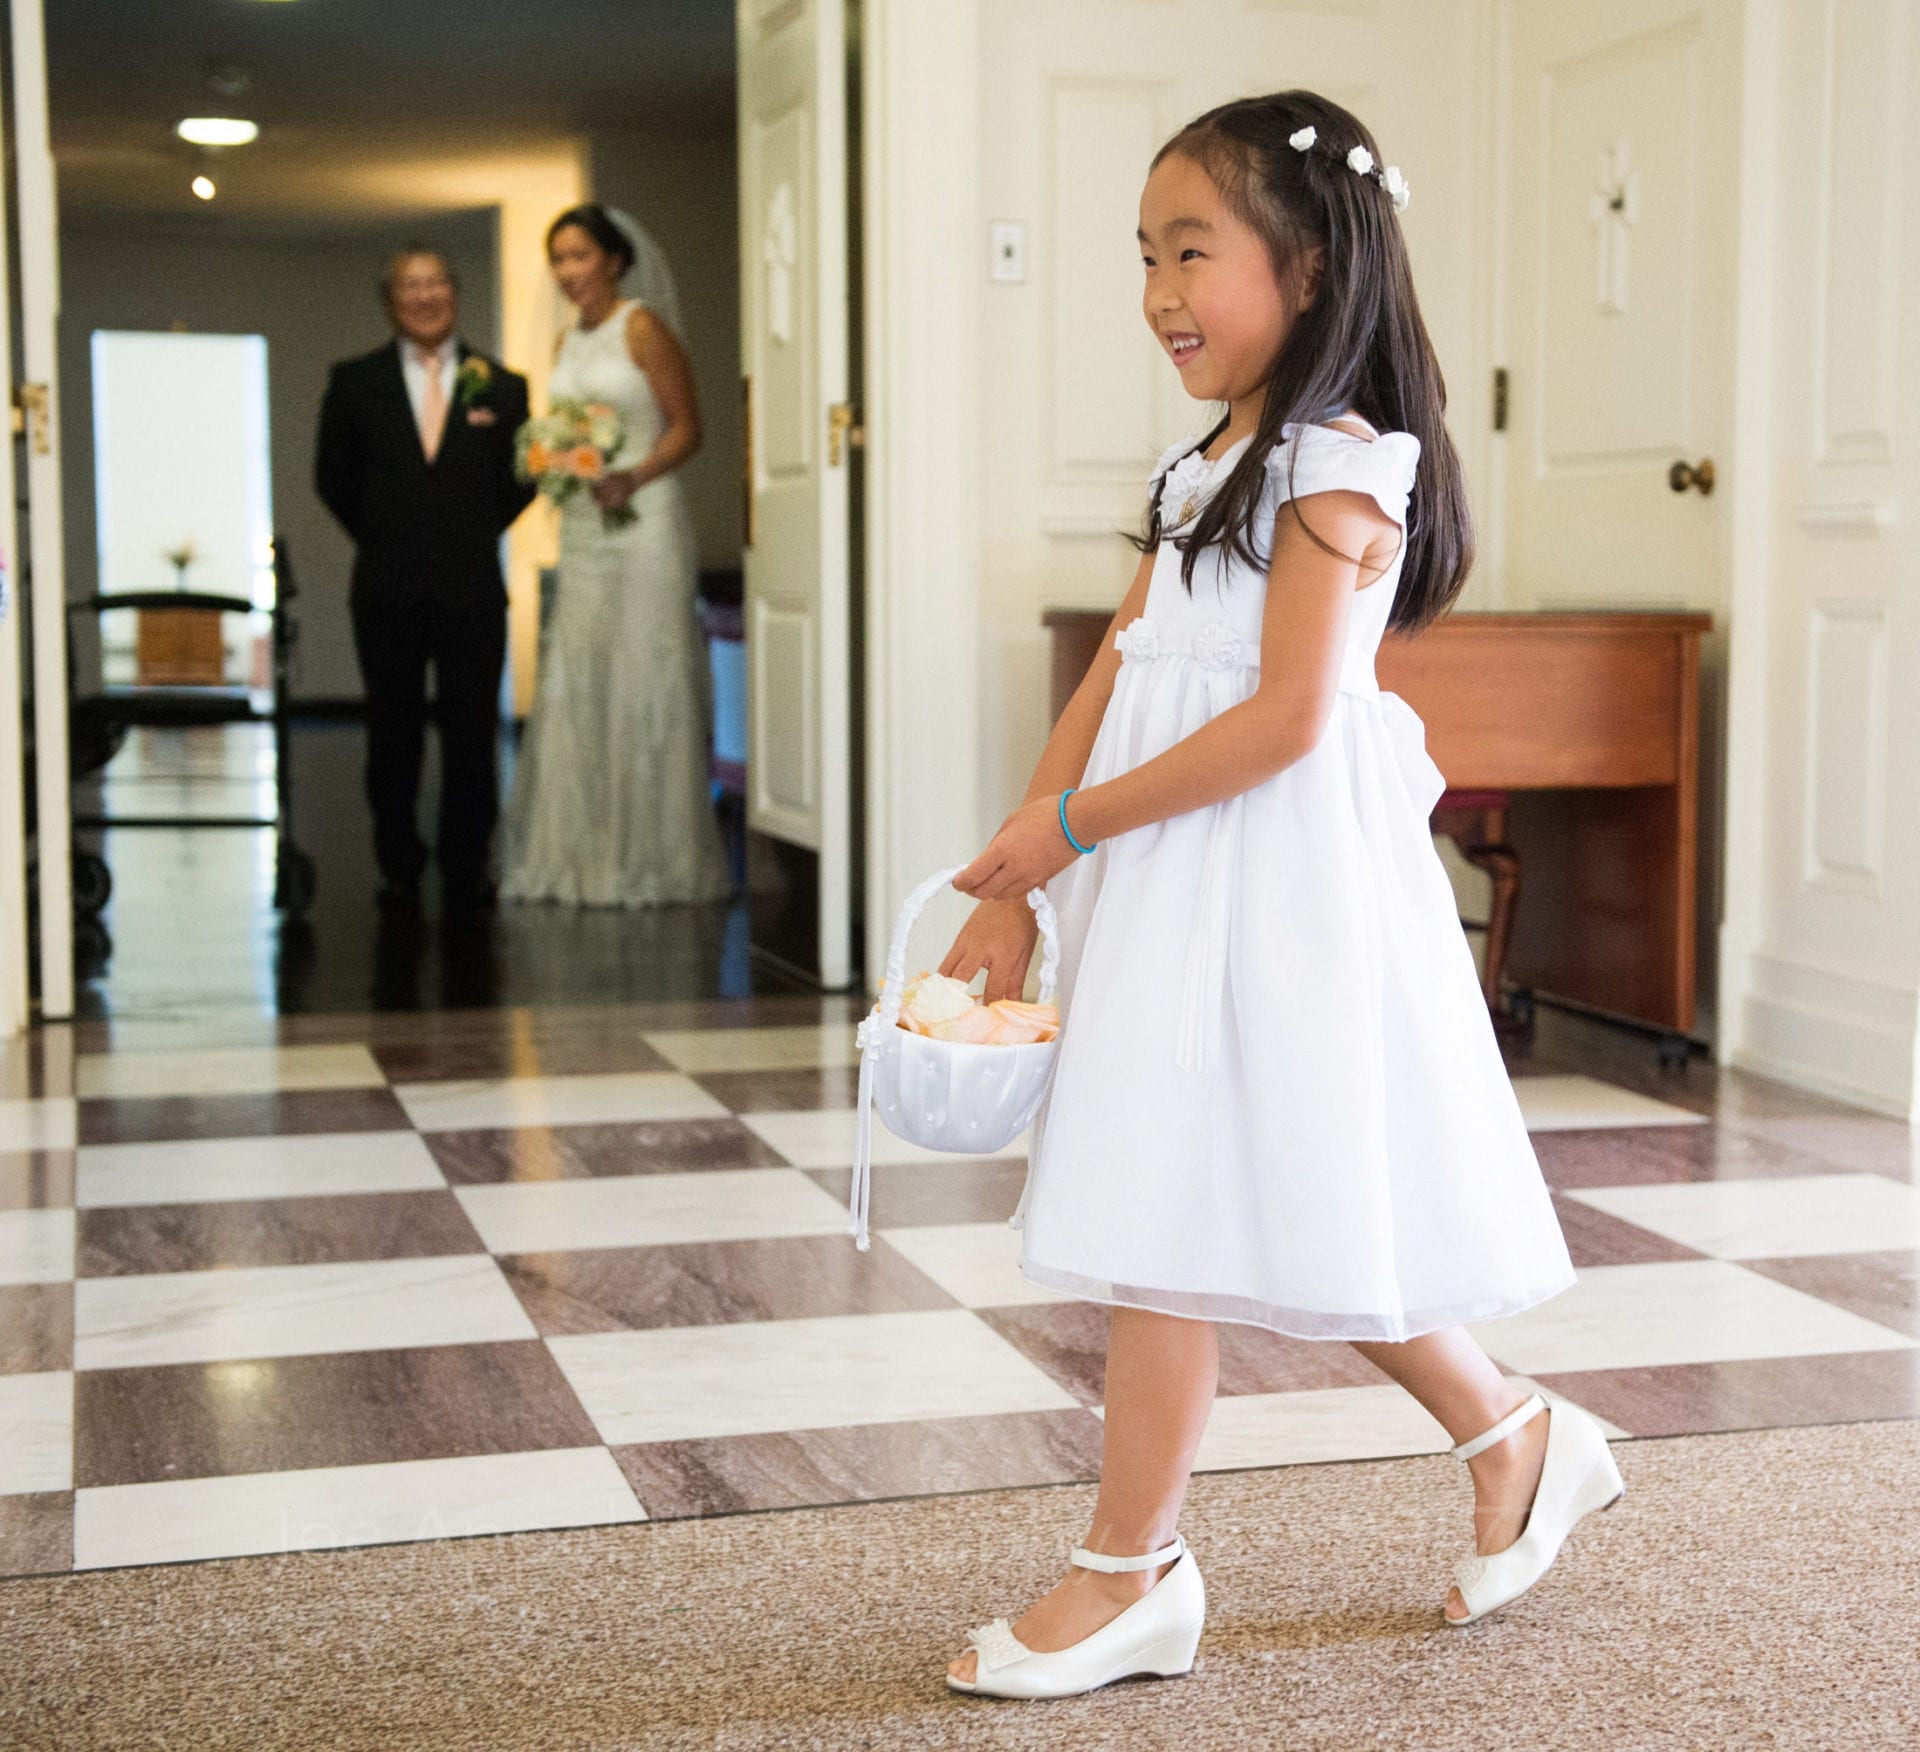 the bride and her father watch a smiling flower girl walk down the aisle with orange flower petals